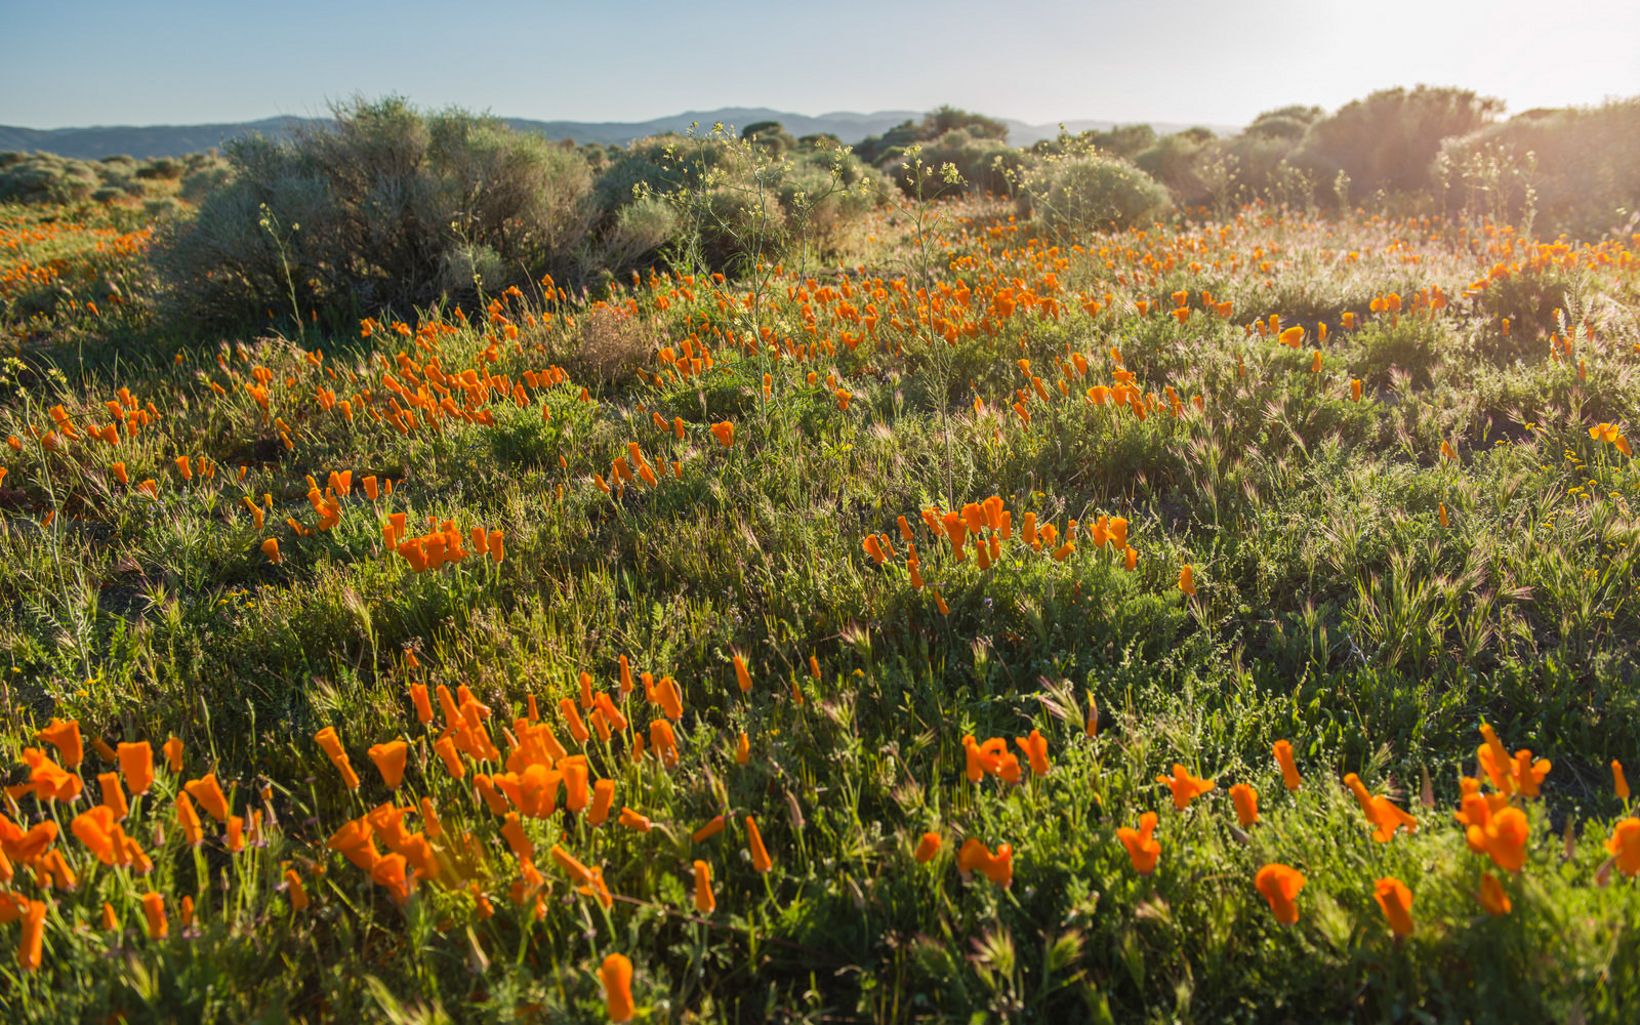 PROTECT NATURE Siting renewable energy in the right places can protect important natural landscapes like these carpets of orange poppies at the Antelope Valley California Poppy Reserve. © Dave Lauridsen